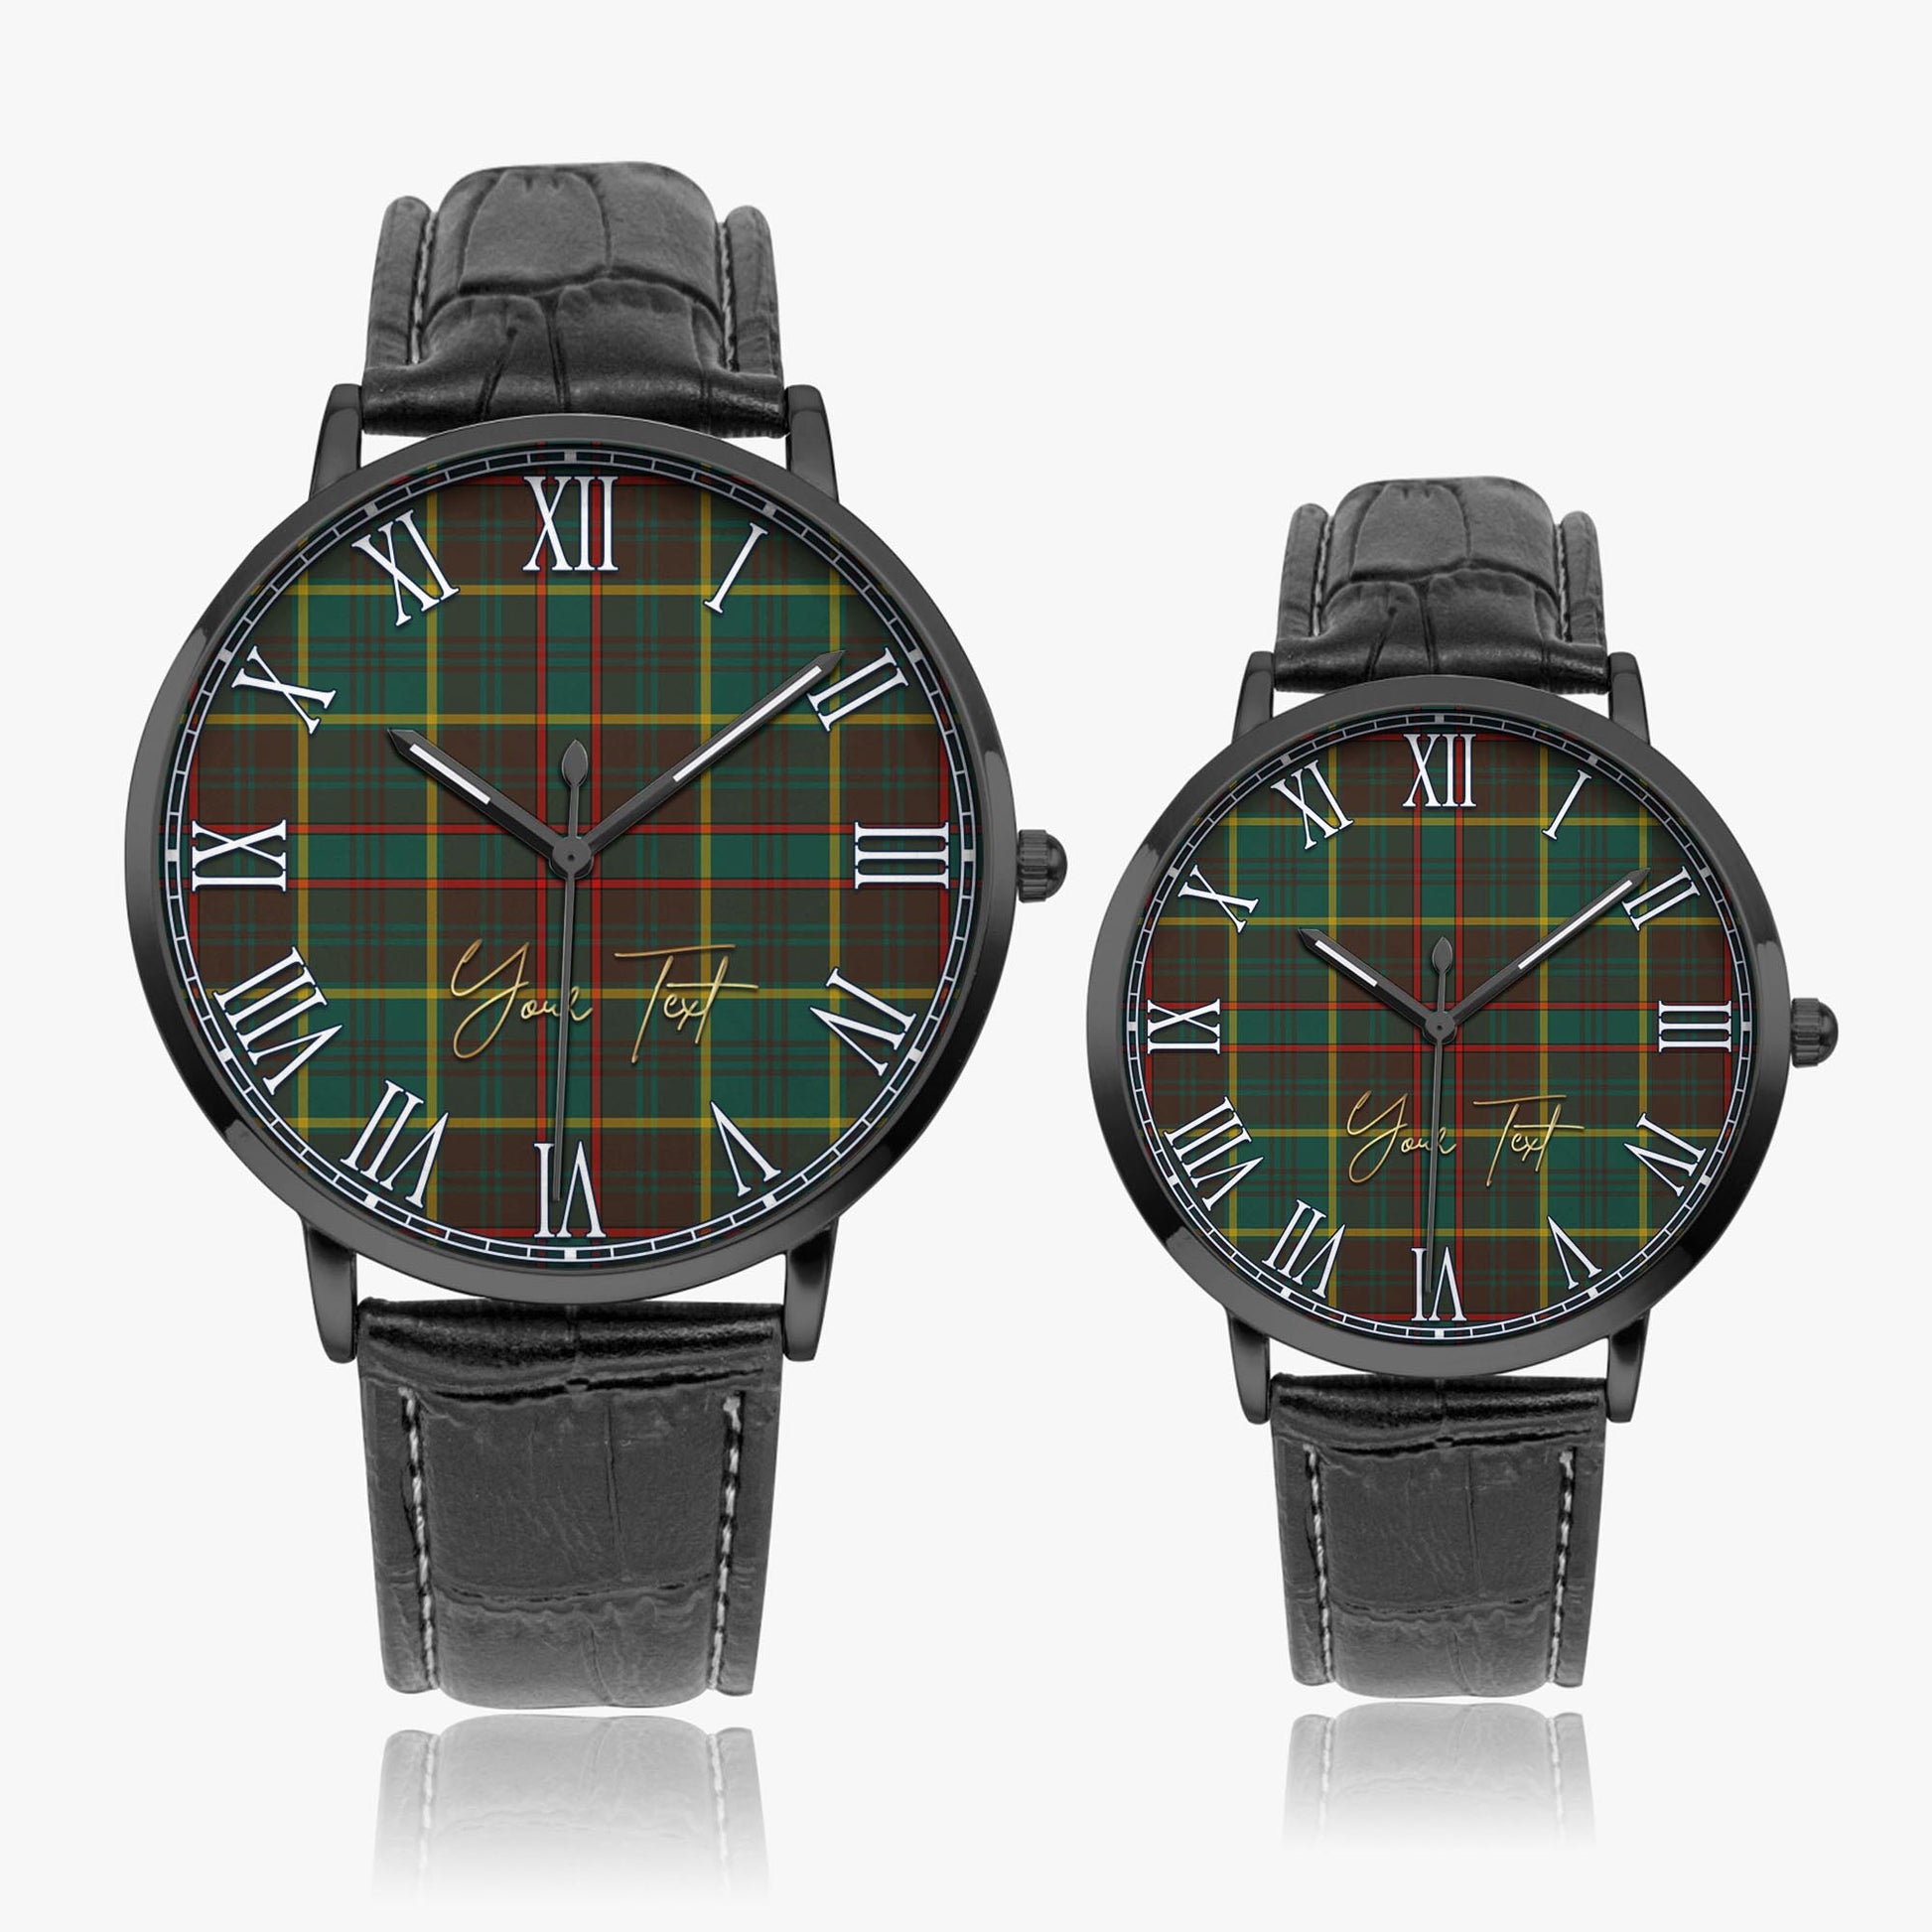 Ontario Province Canada Tartan Personalized Your Text Leather Trap Quartz Watch Ultra Thin Black Case With Black Leather Strap - Tartanvibesclothing